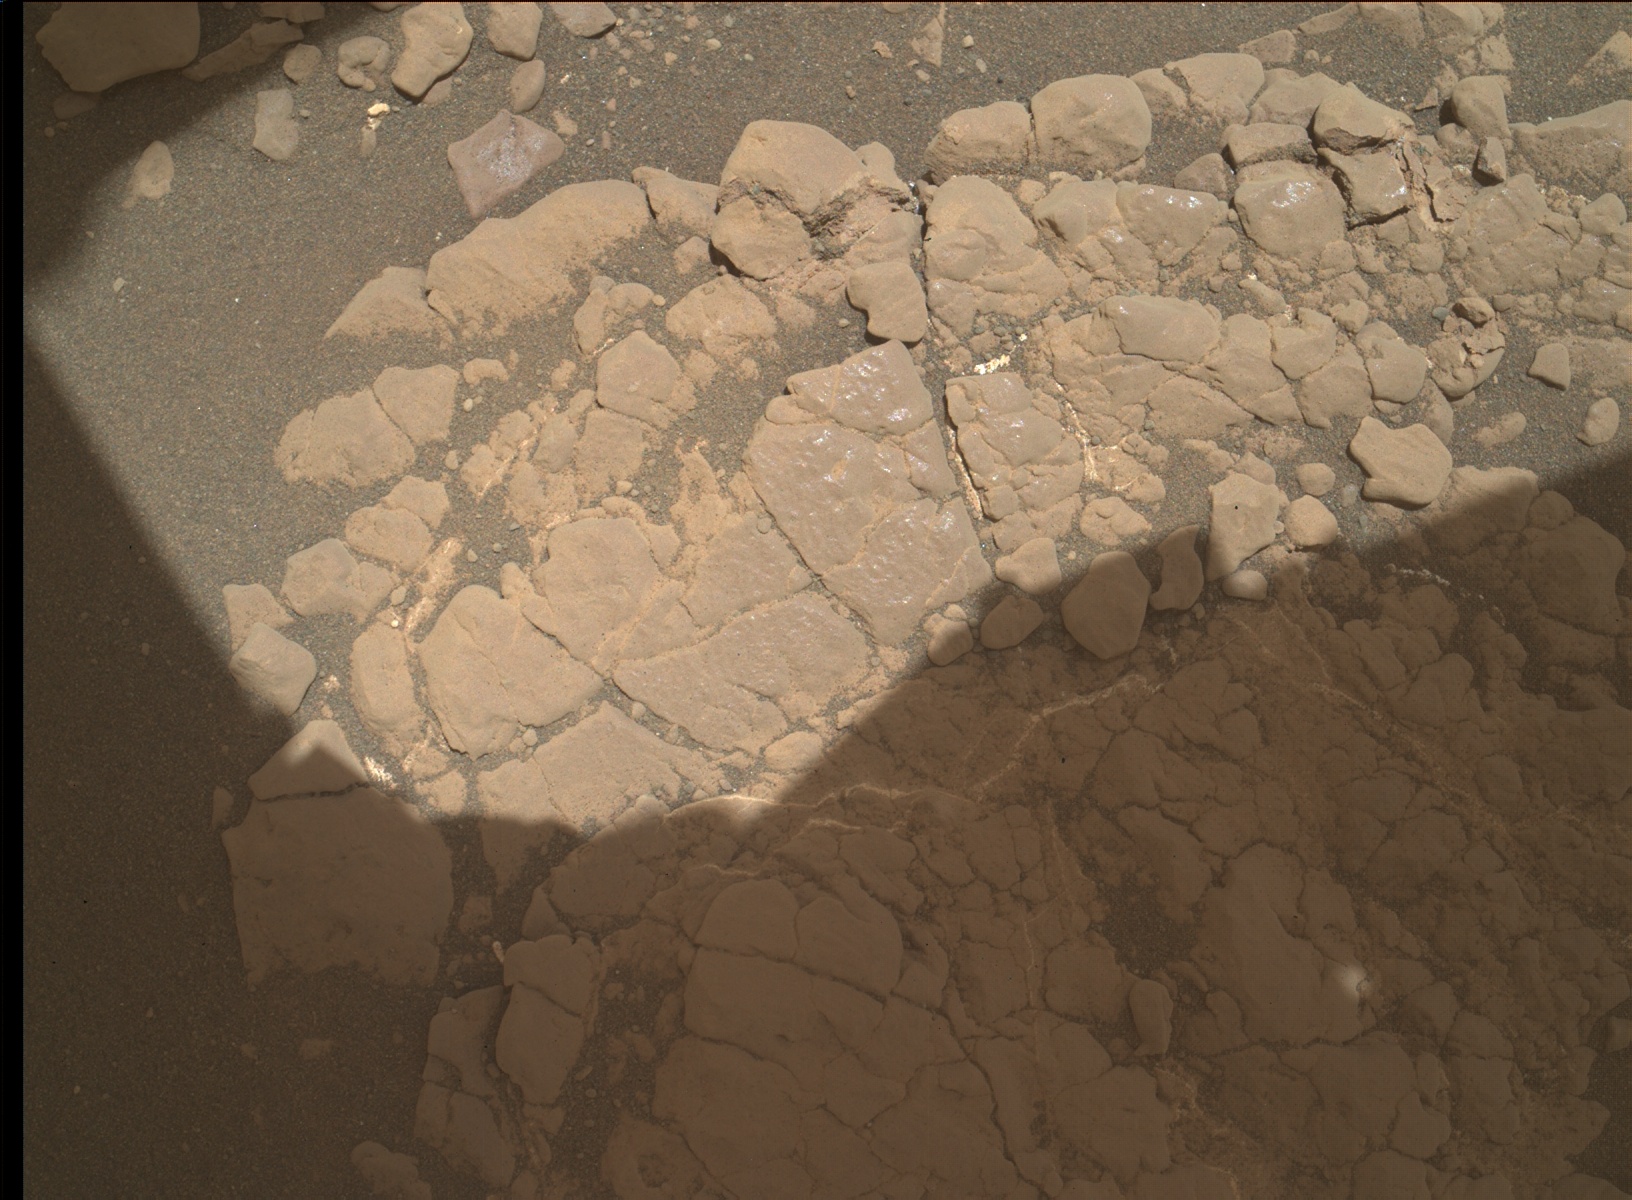 Nasa's Mars rover Curiosity acquired this image using its Mars Hand Lens Imager (MAHLI) on Sol 2577